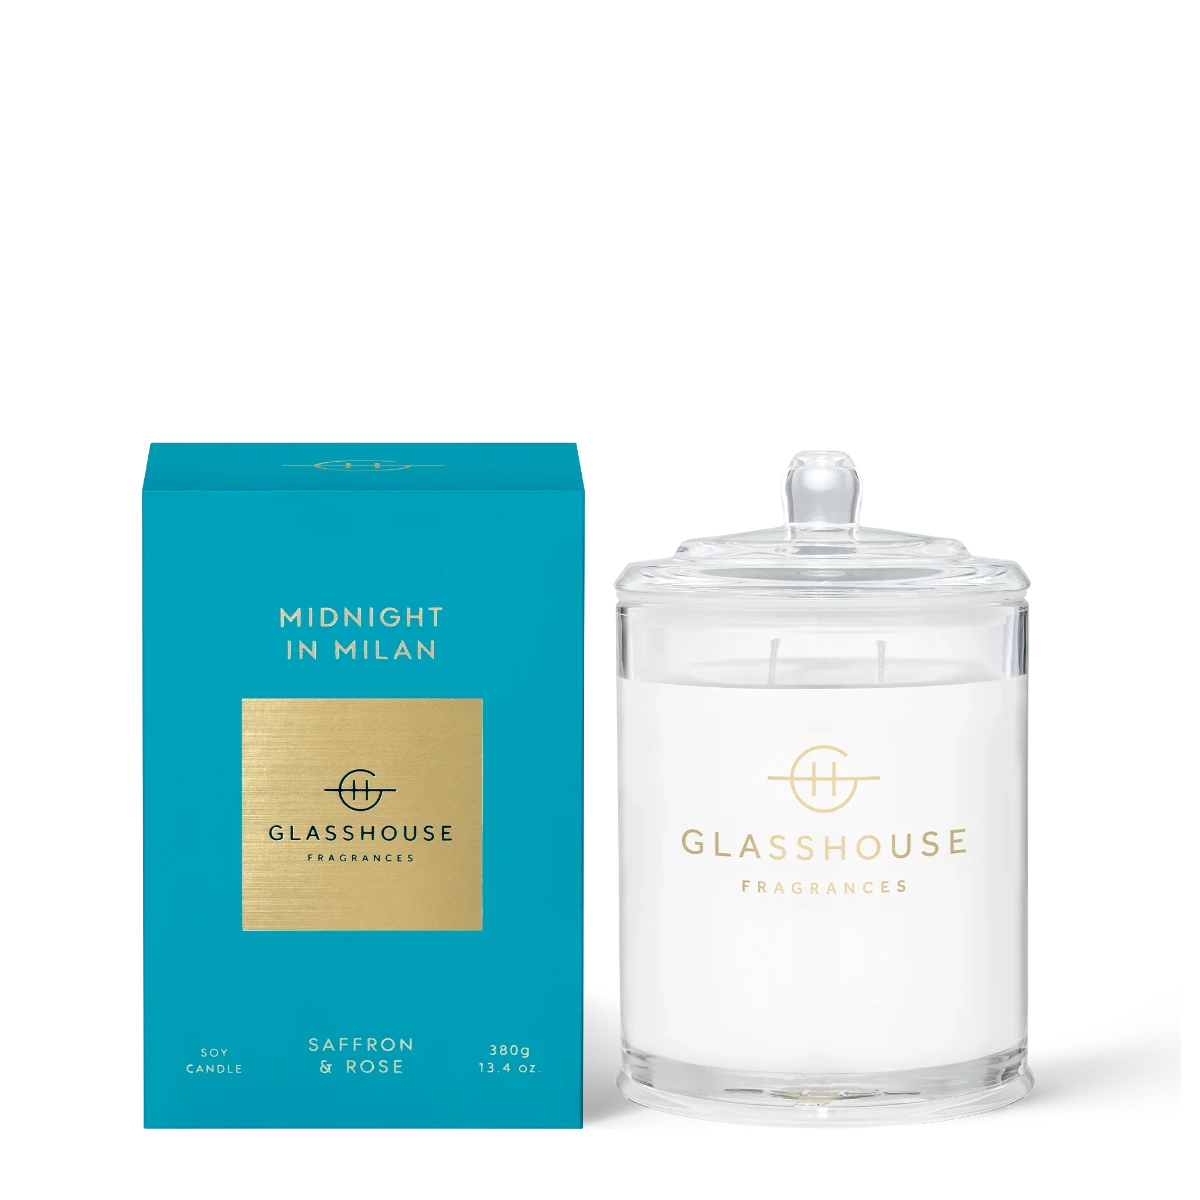 Midnight in Milan 13.4 oz Candle